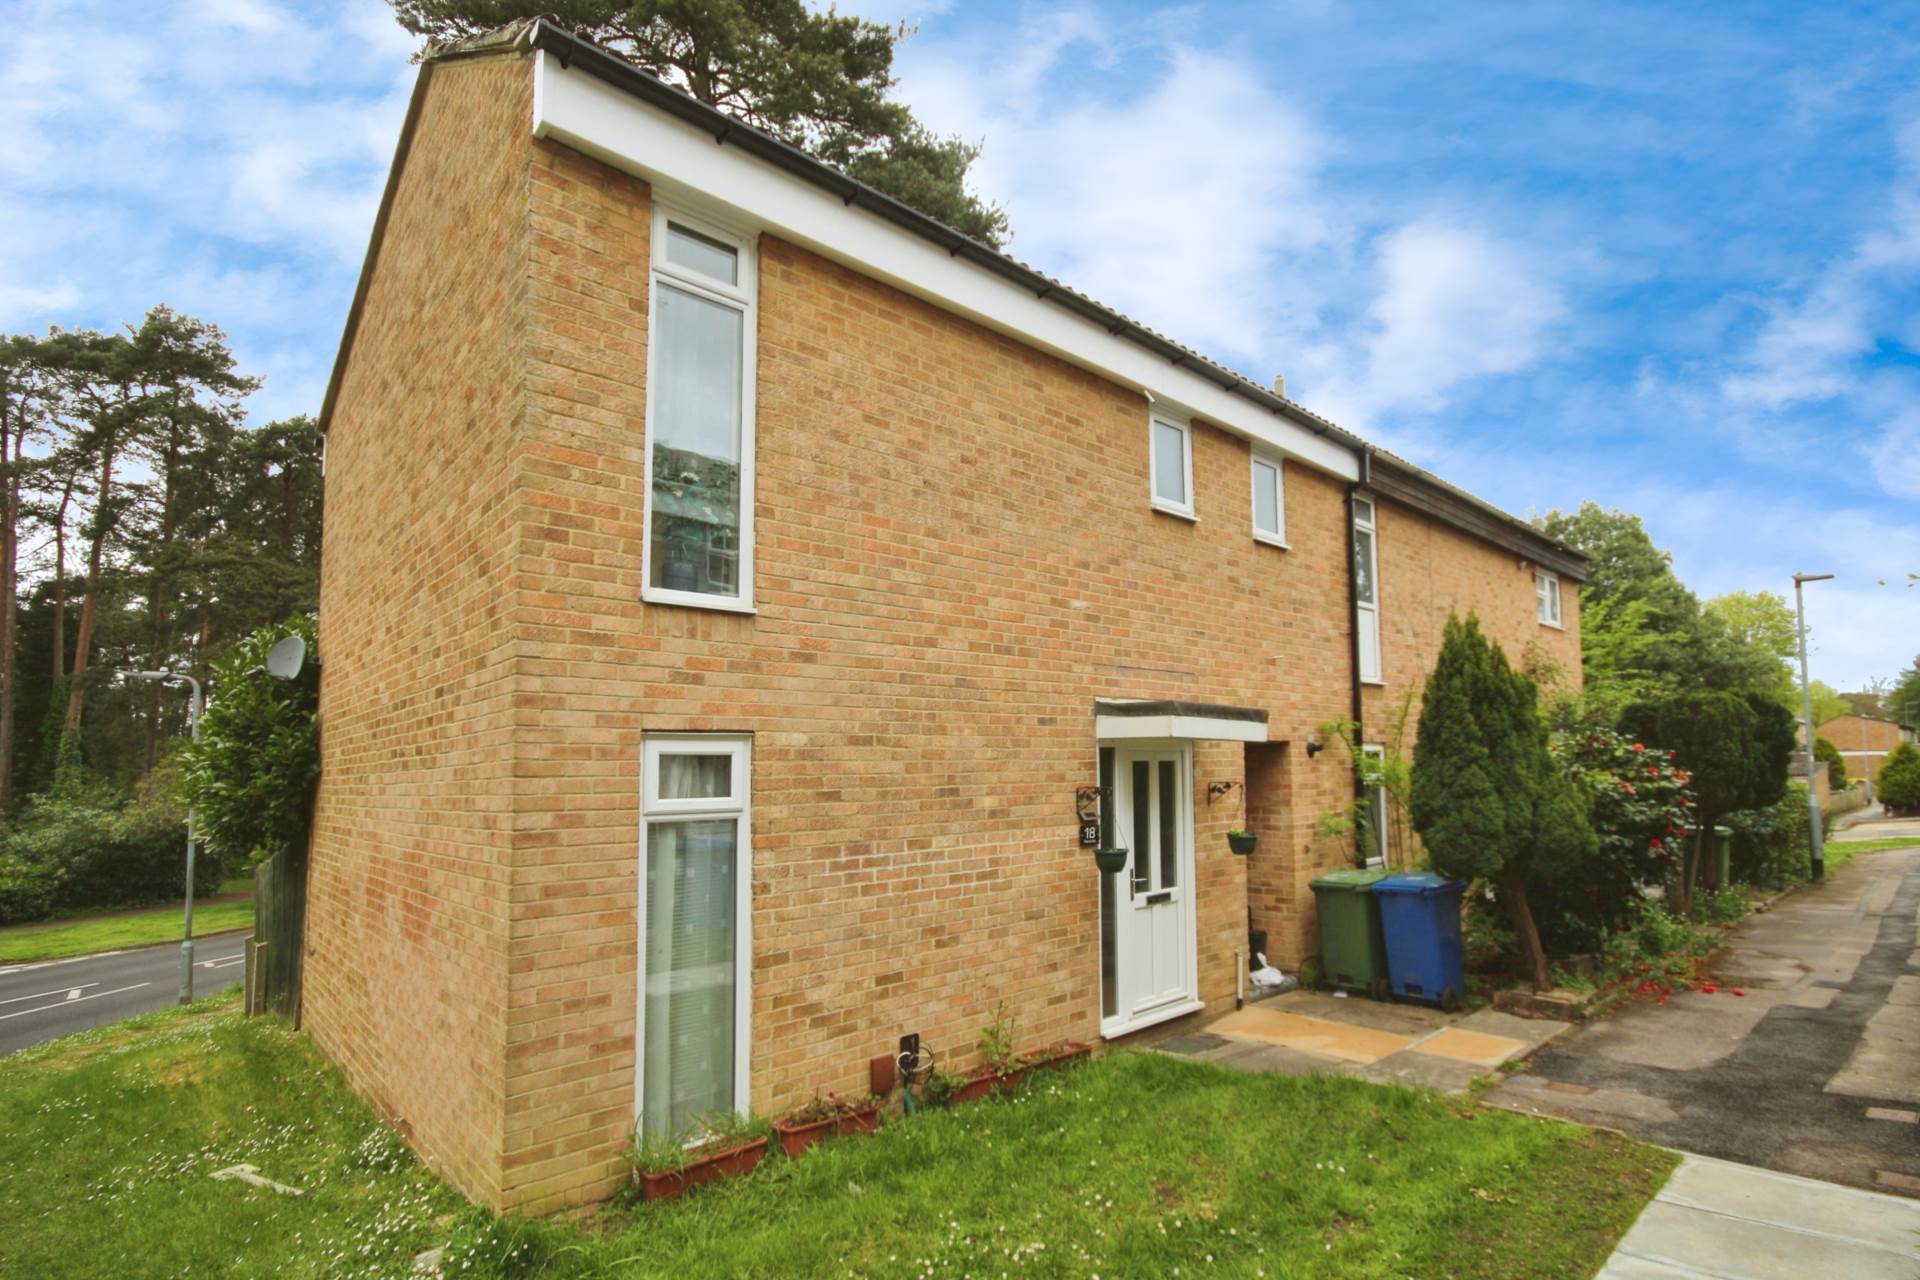 2 bed Semi-Detached House for rent in Bracknell. From Sears Property - Bracknell